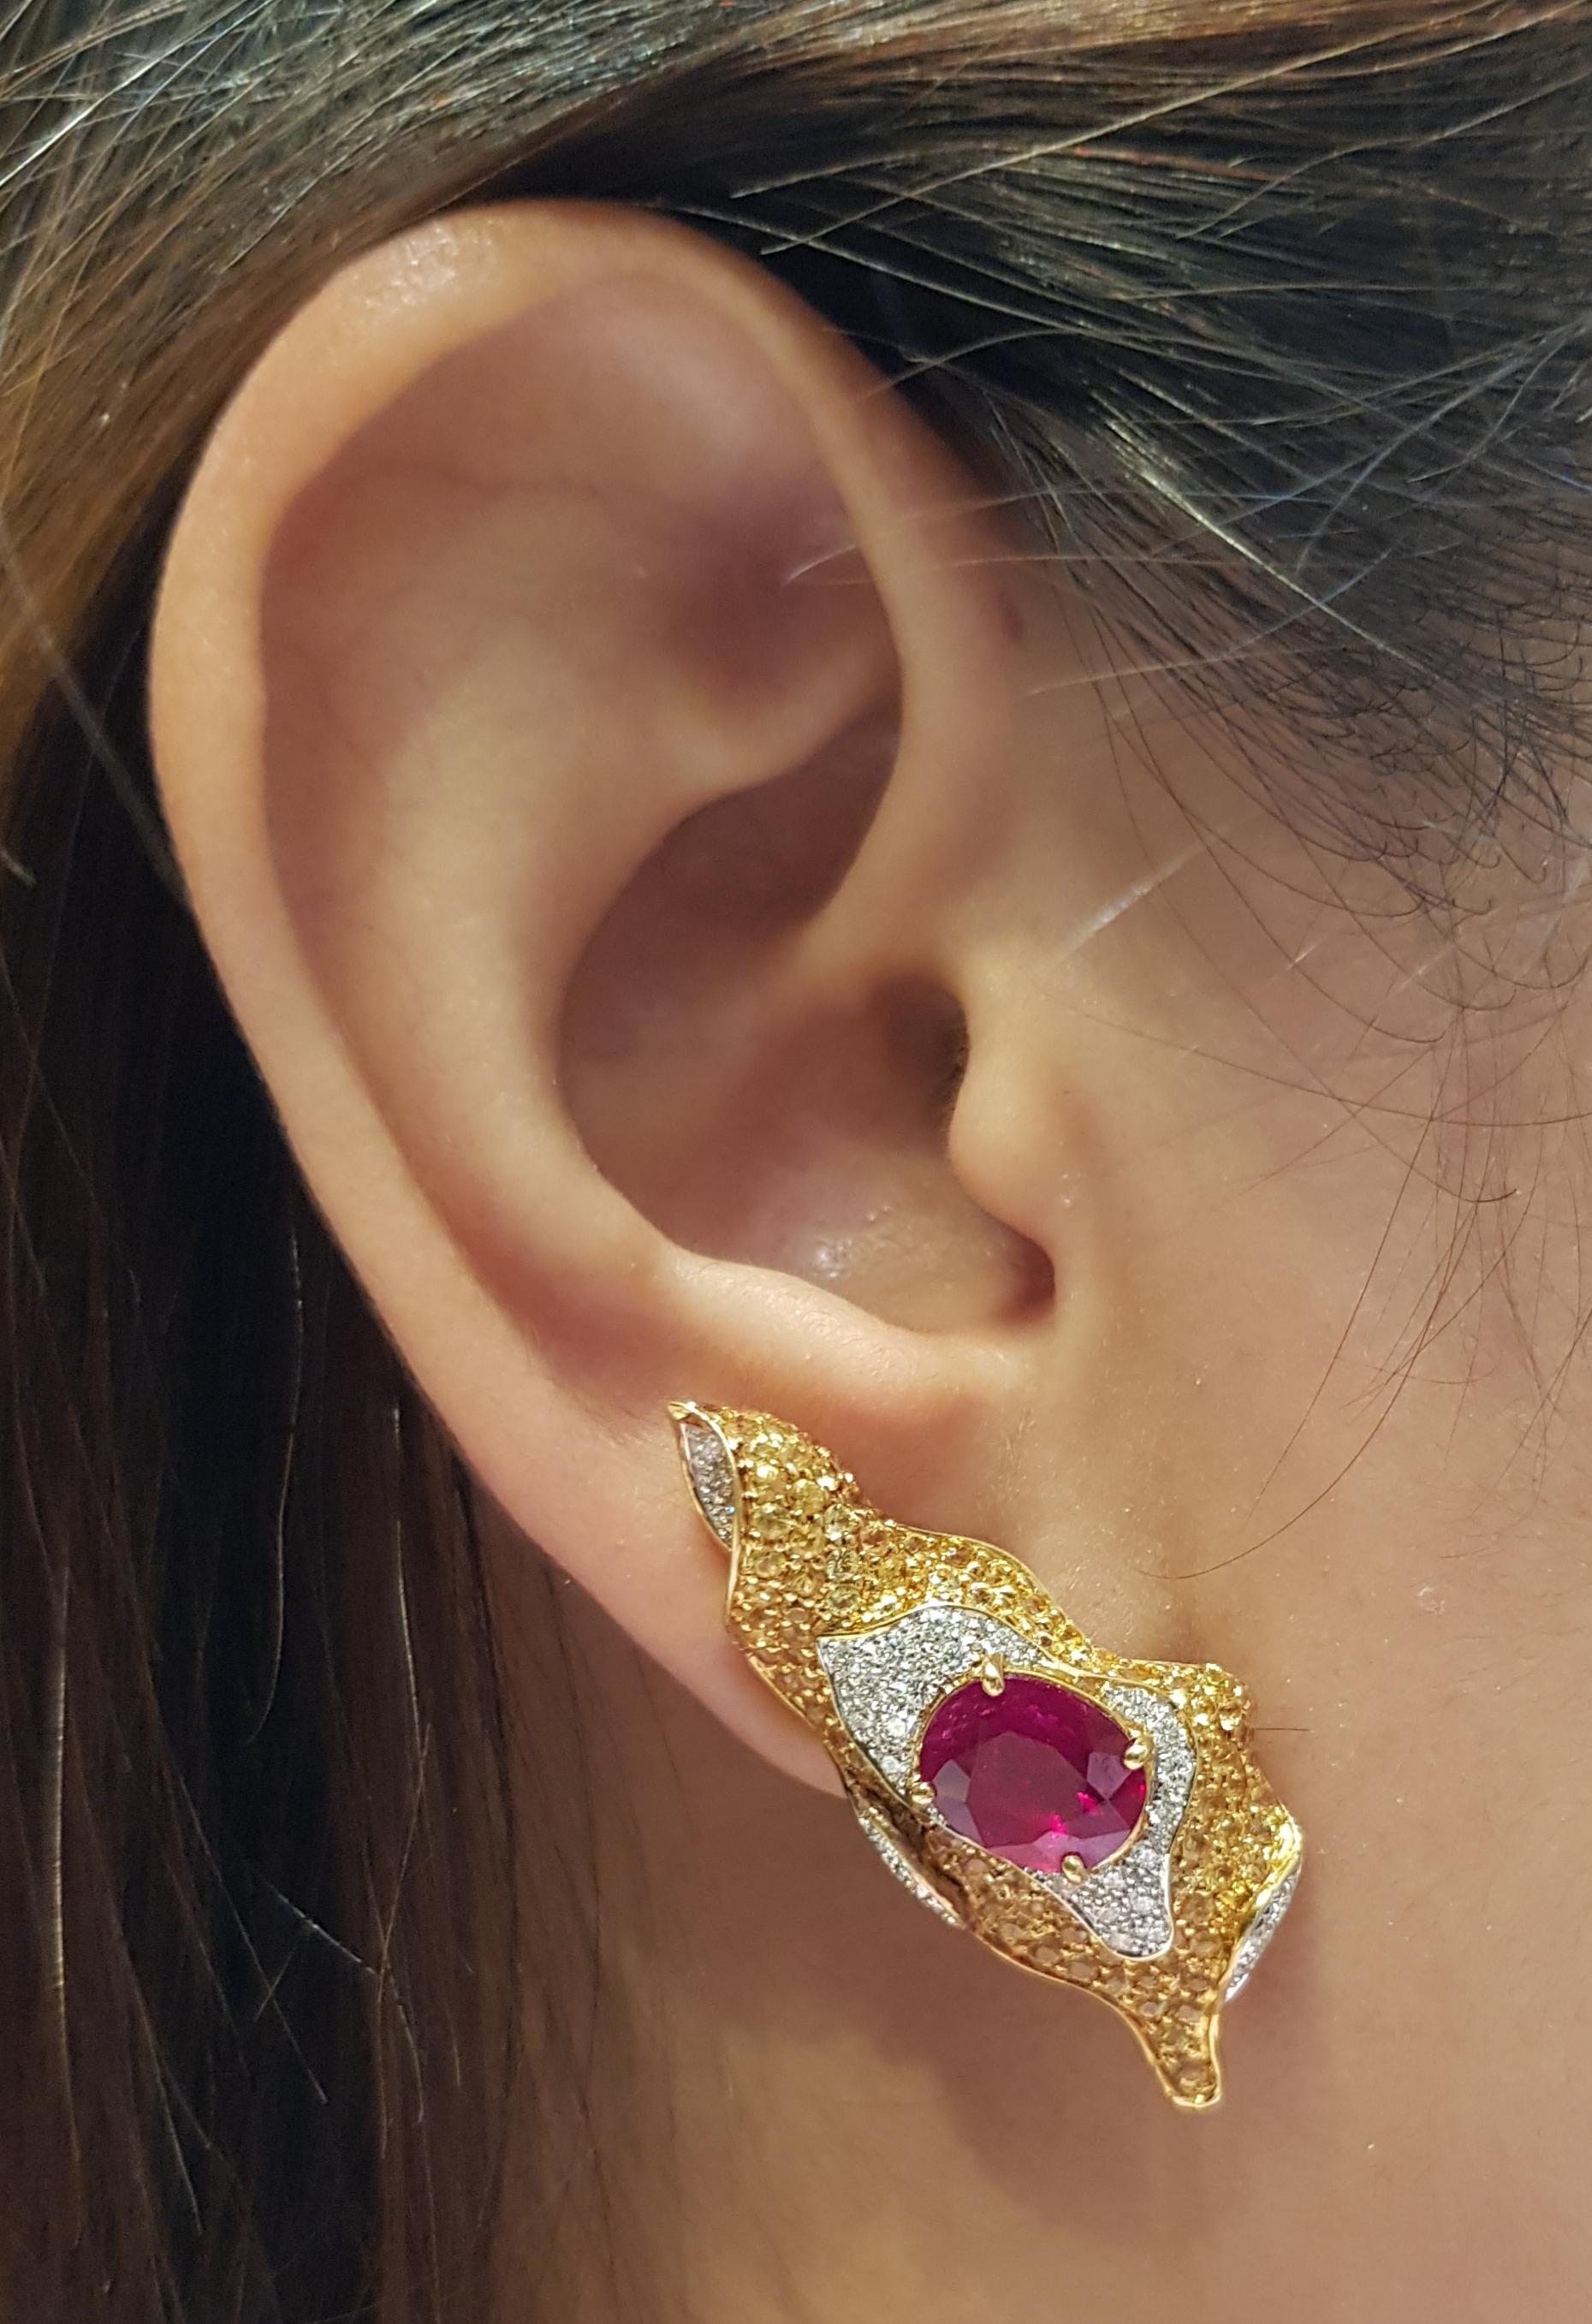 Ruby 3.88 carats with Yellow Sapphire 3.09 carats and Diamond 0.58 carat Earrings set in 18 Karat Gold Settings

Width:  1.5 cm 
Length:  3.8 cm
Total Weight: 13.95 grams

